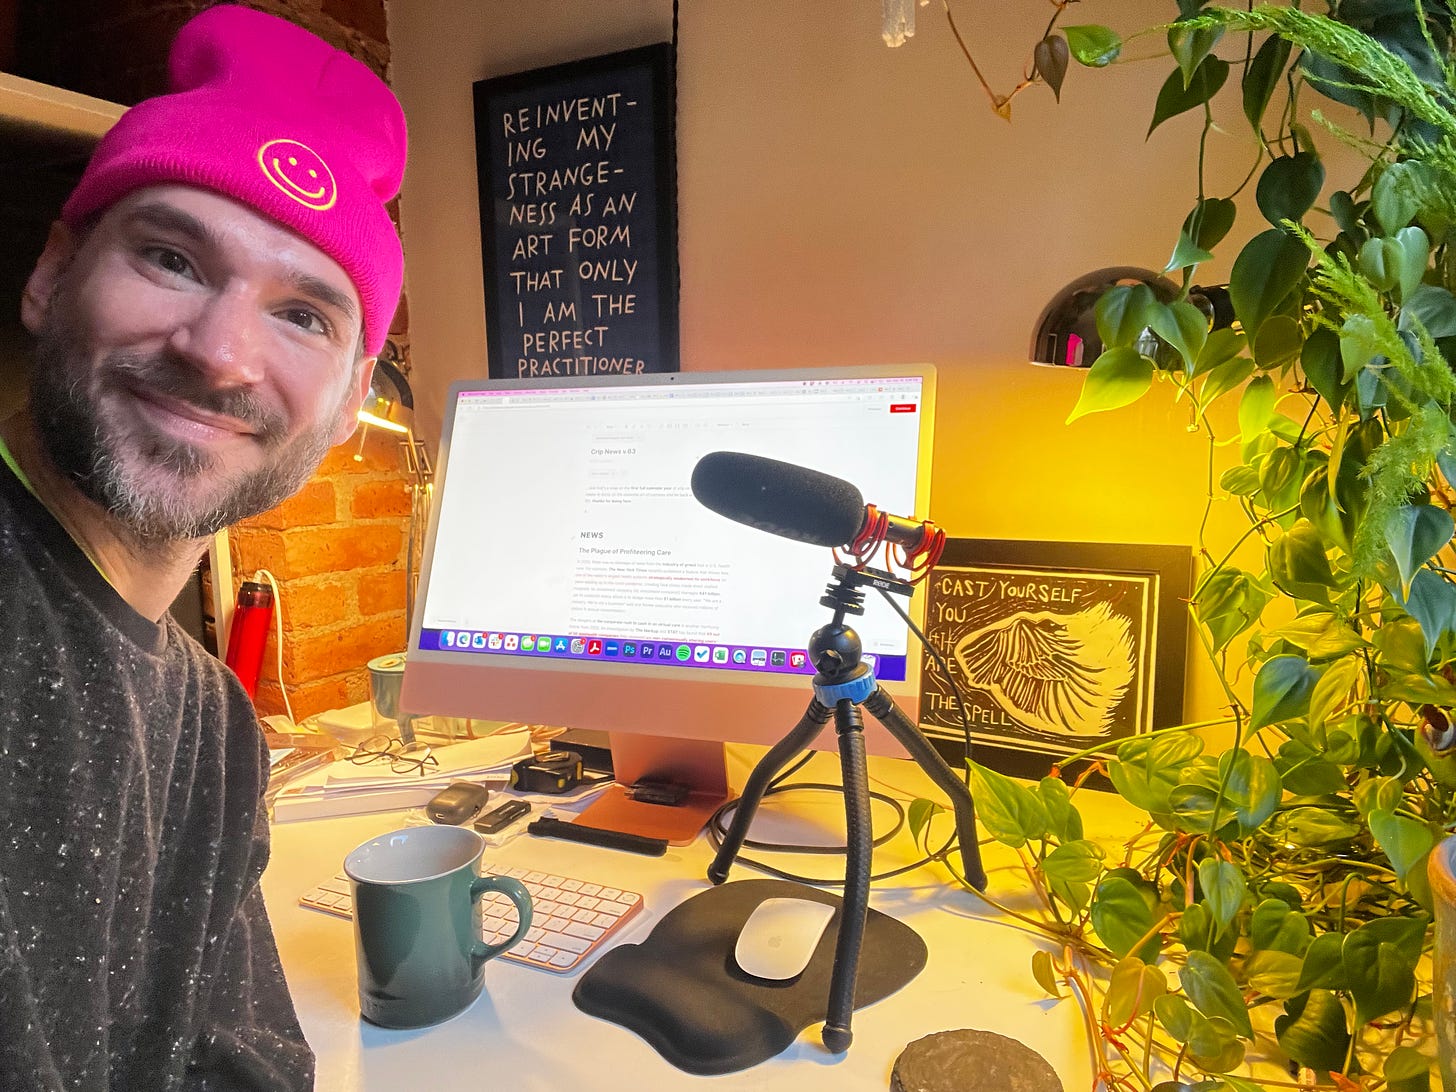 i’m a scruffy white person wearing a bright pink beanie with a neon green smiley face on my forehead. i’m at my desk with an imac and microphone, a heart-shaped philodendron plant sprawling out next to me, a mug for tea, and a few artworks the help enchant the newsroom.